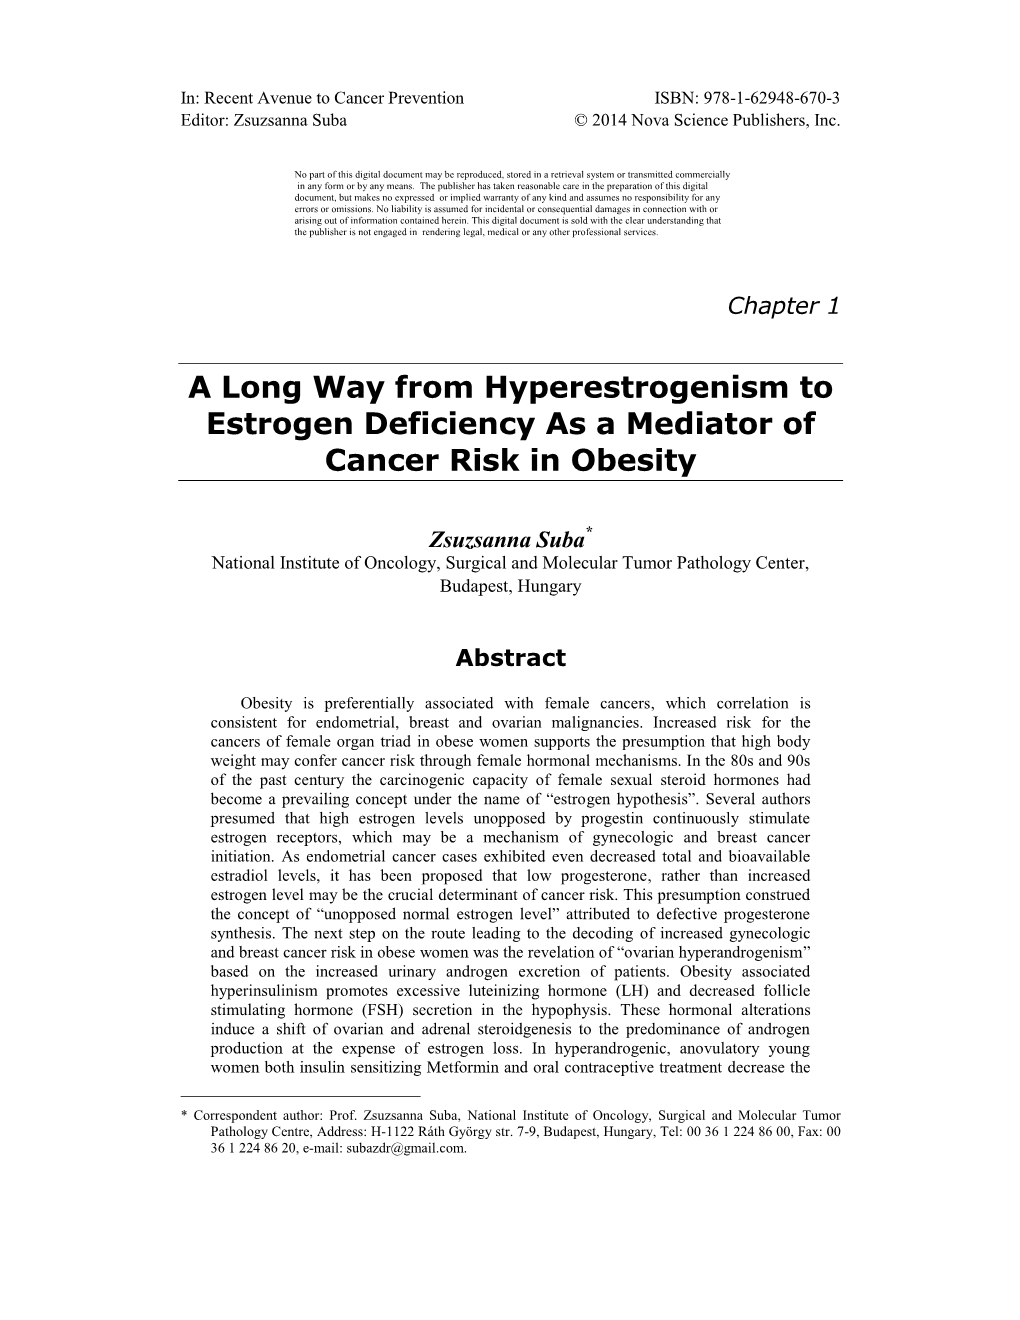 A Long Way from Hyperestrogenism to Estrogen Deficiency As a Mediator of Cancer Risk in Obesity